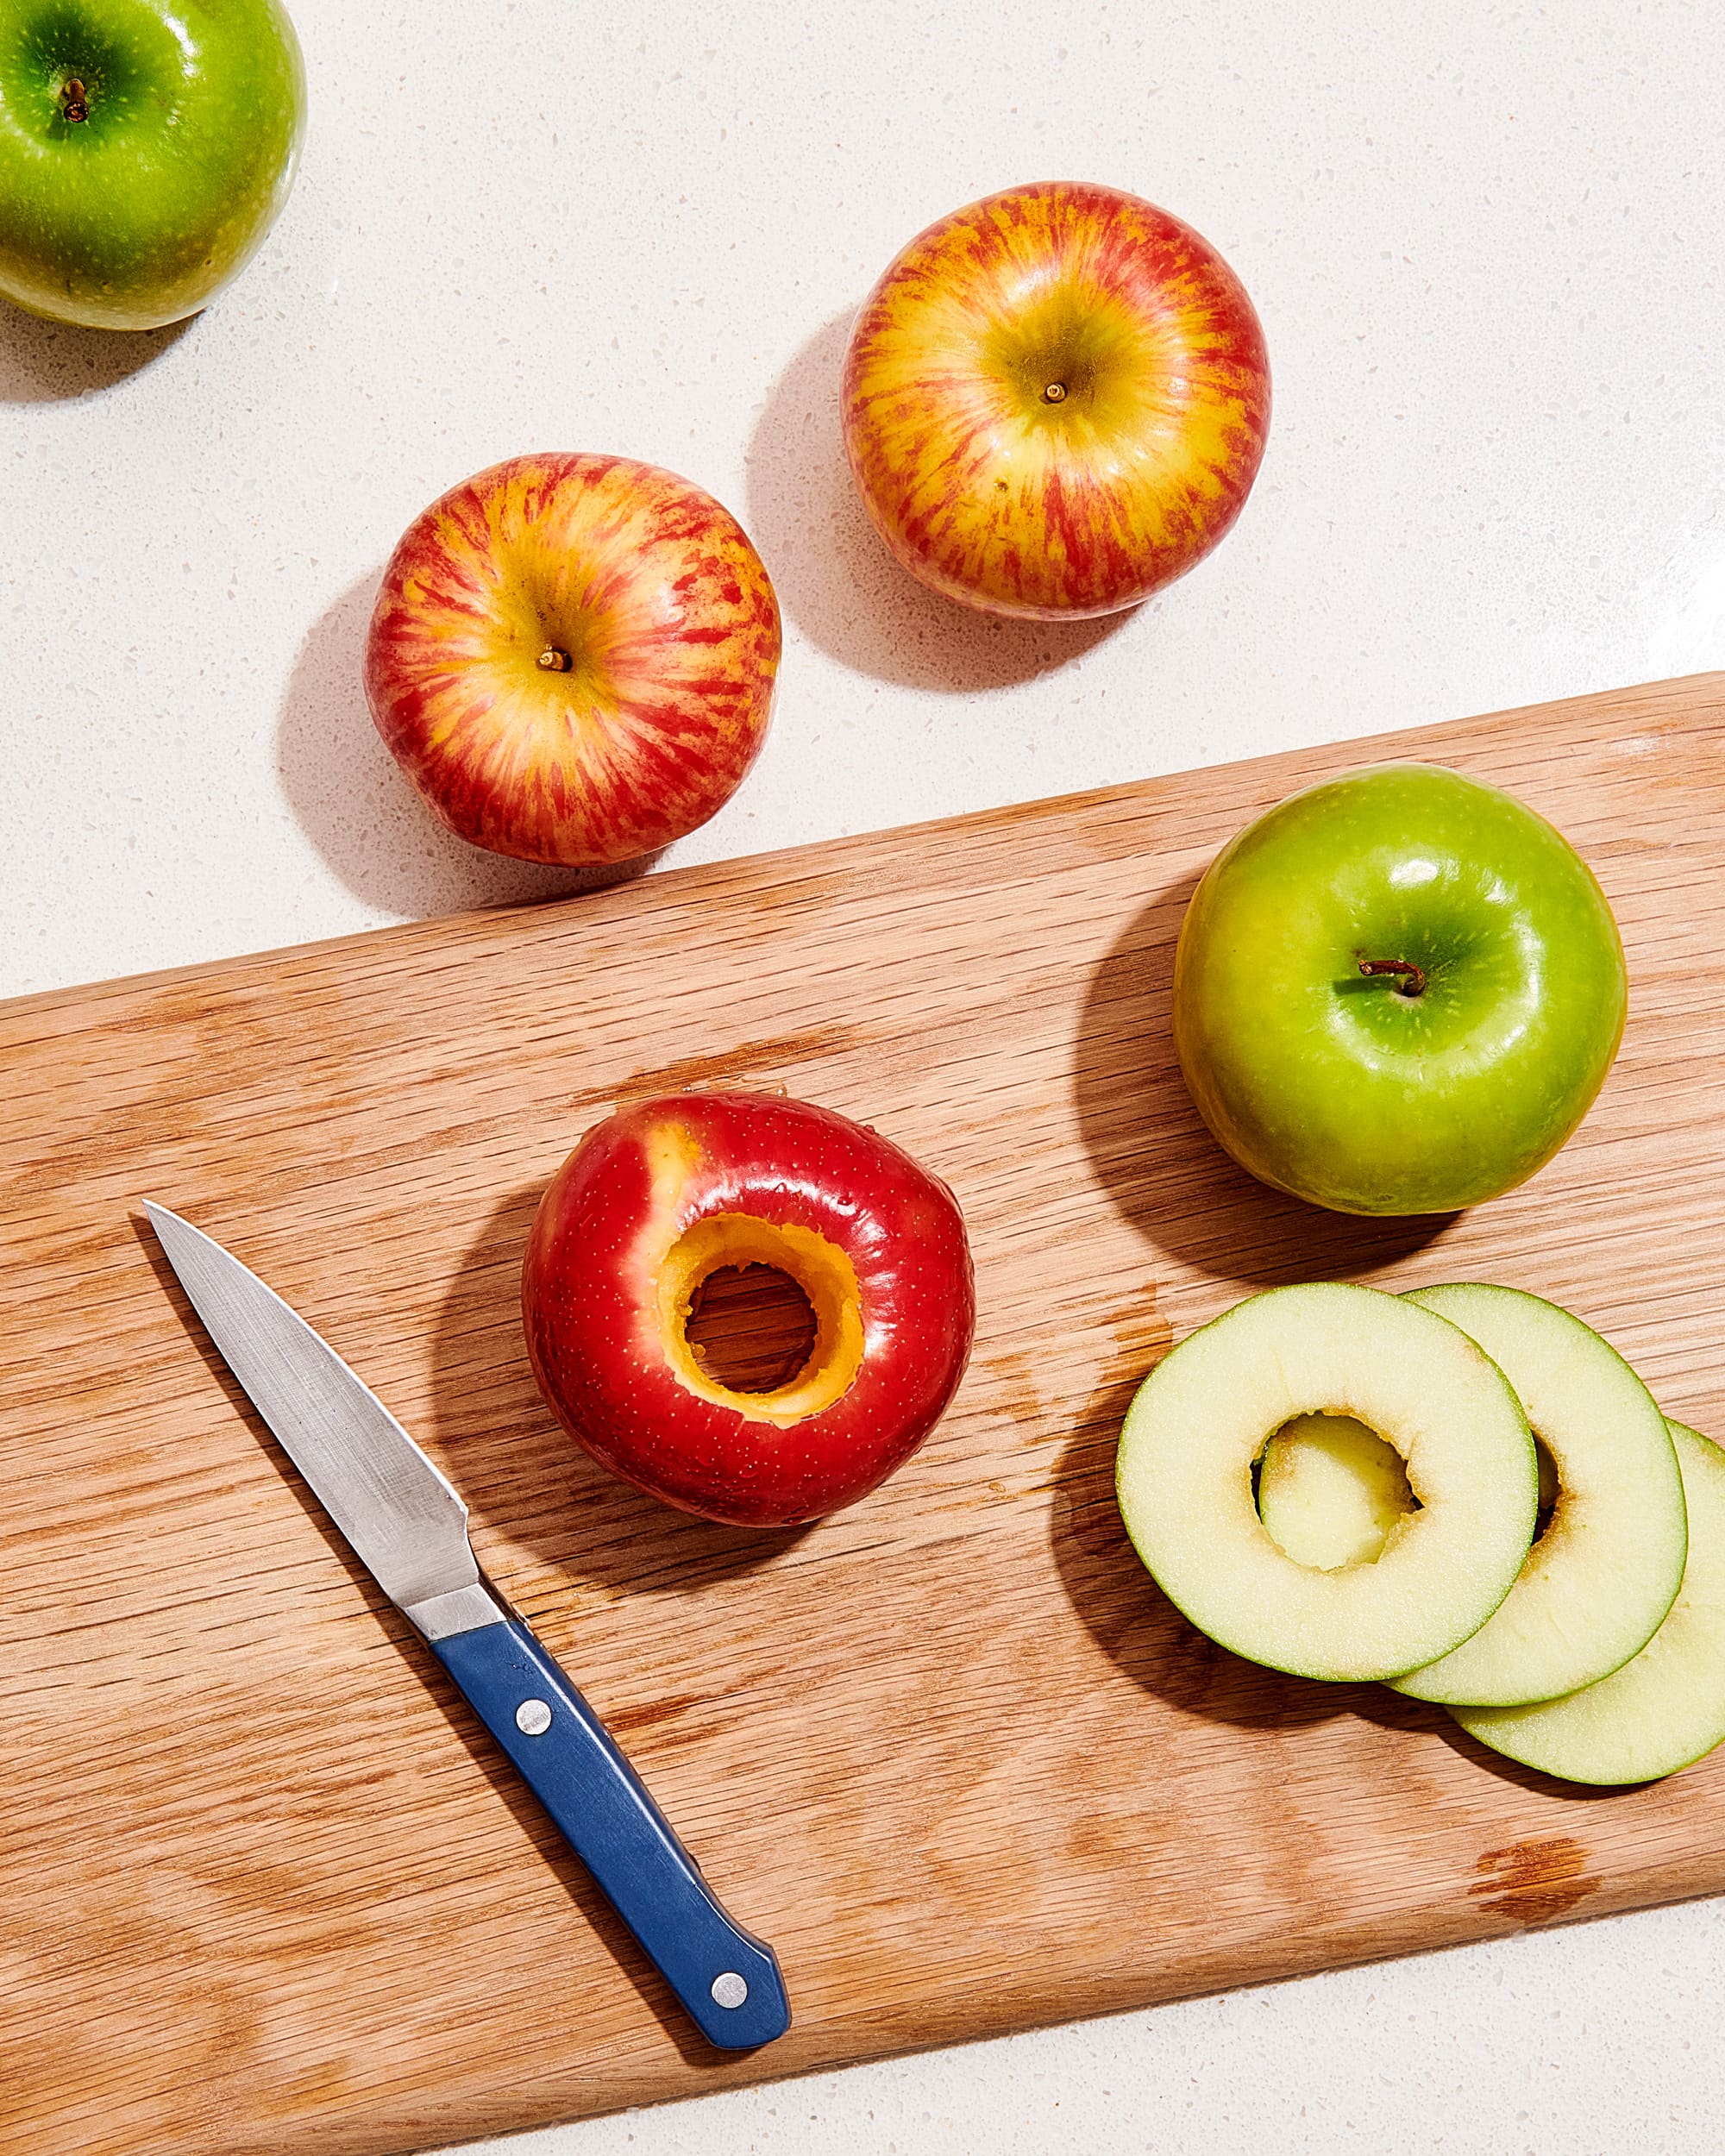 How To Cut / Core An Apple